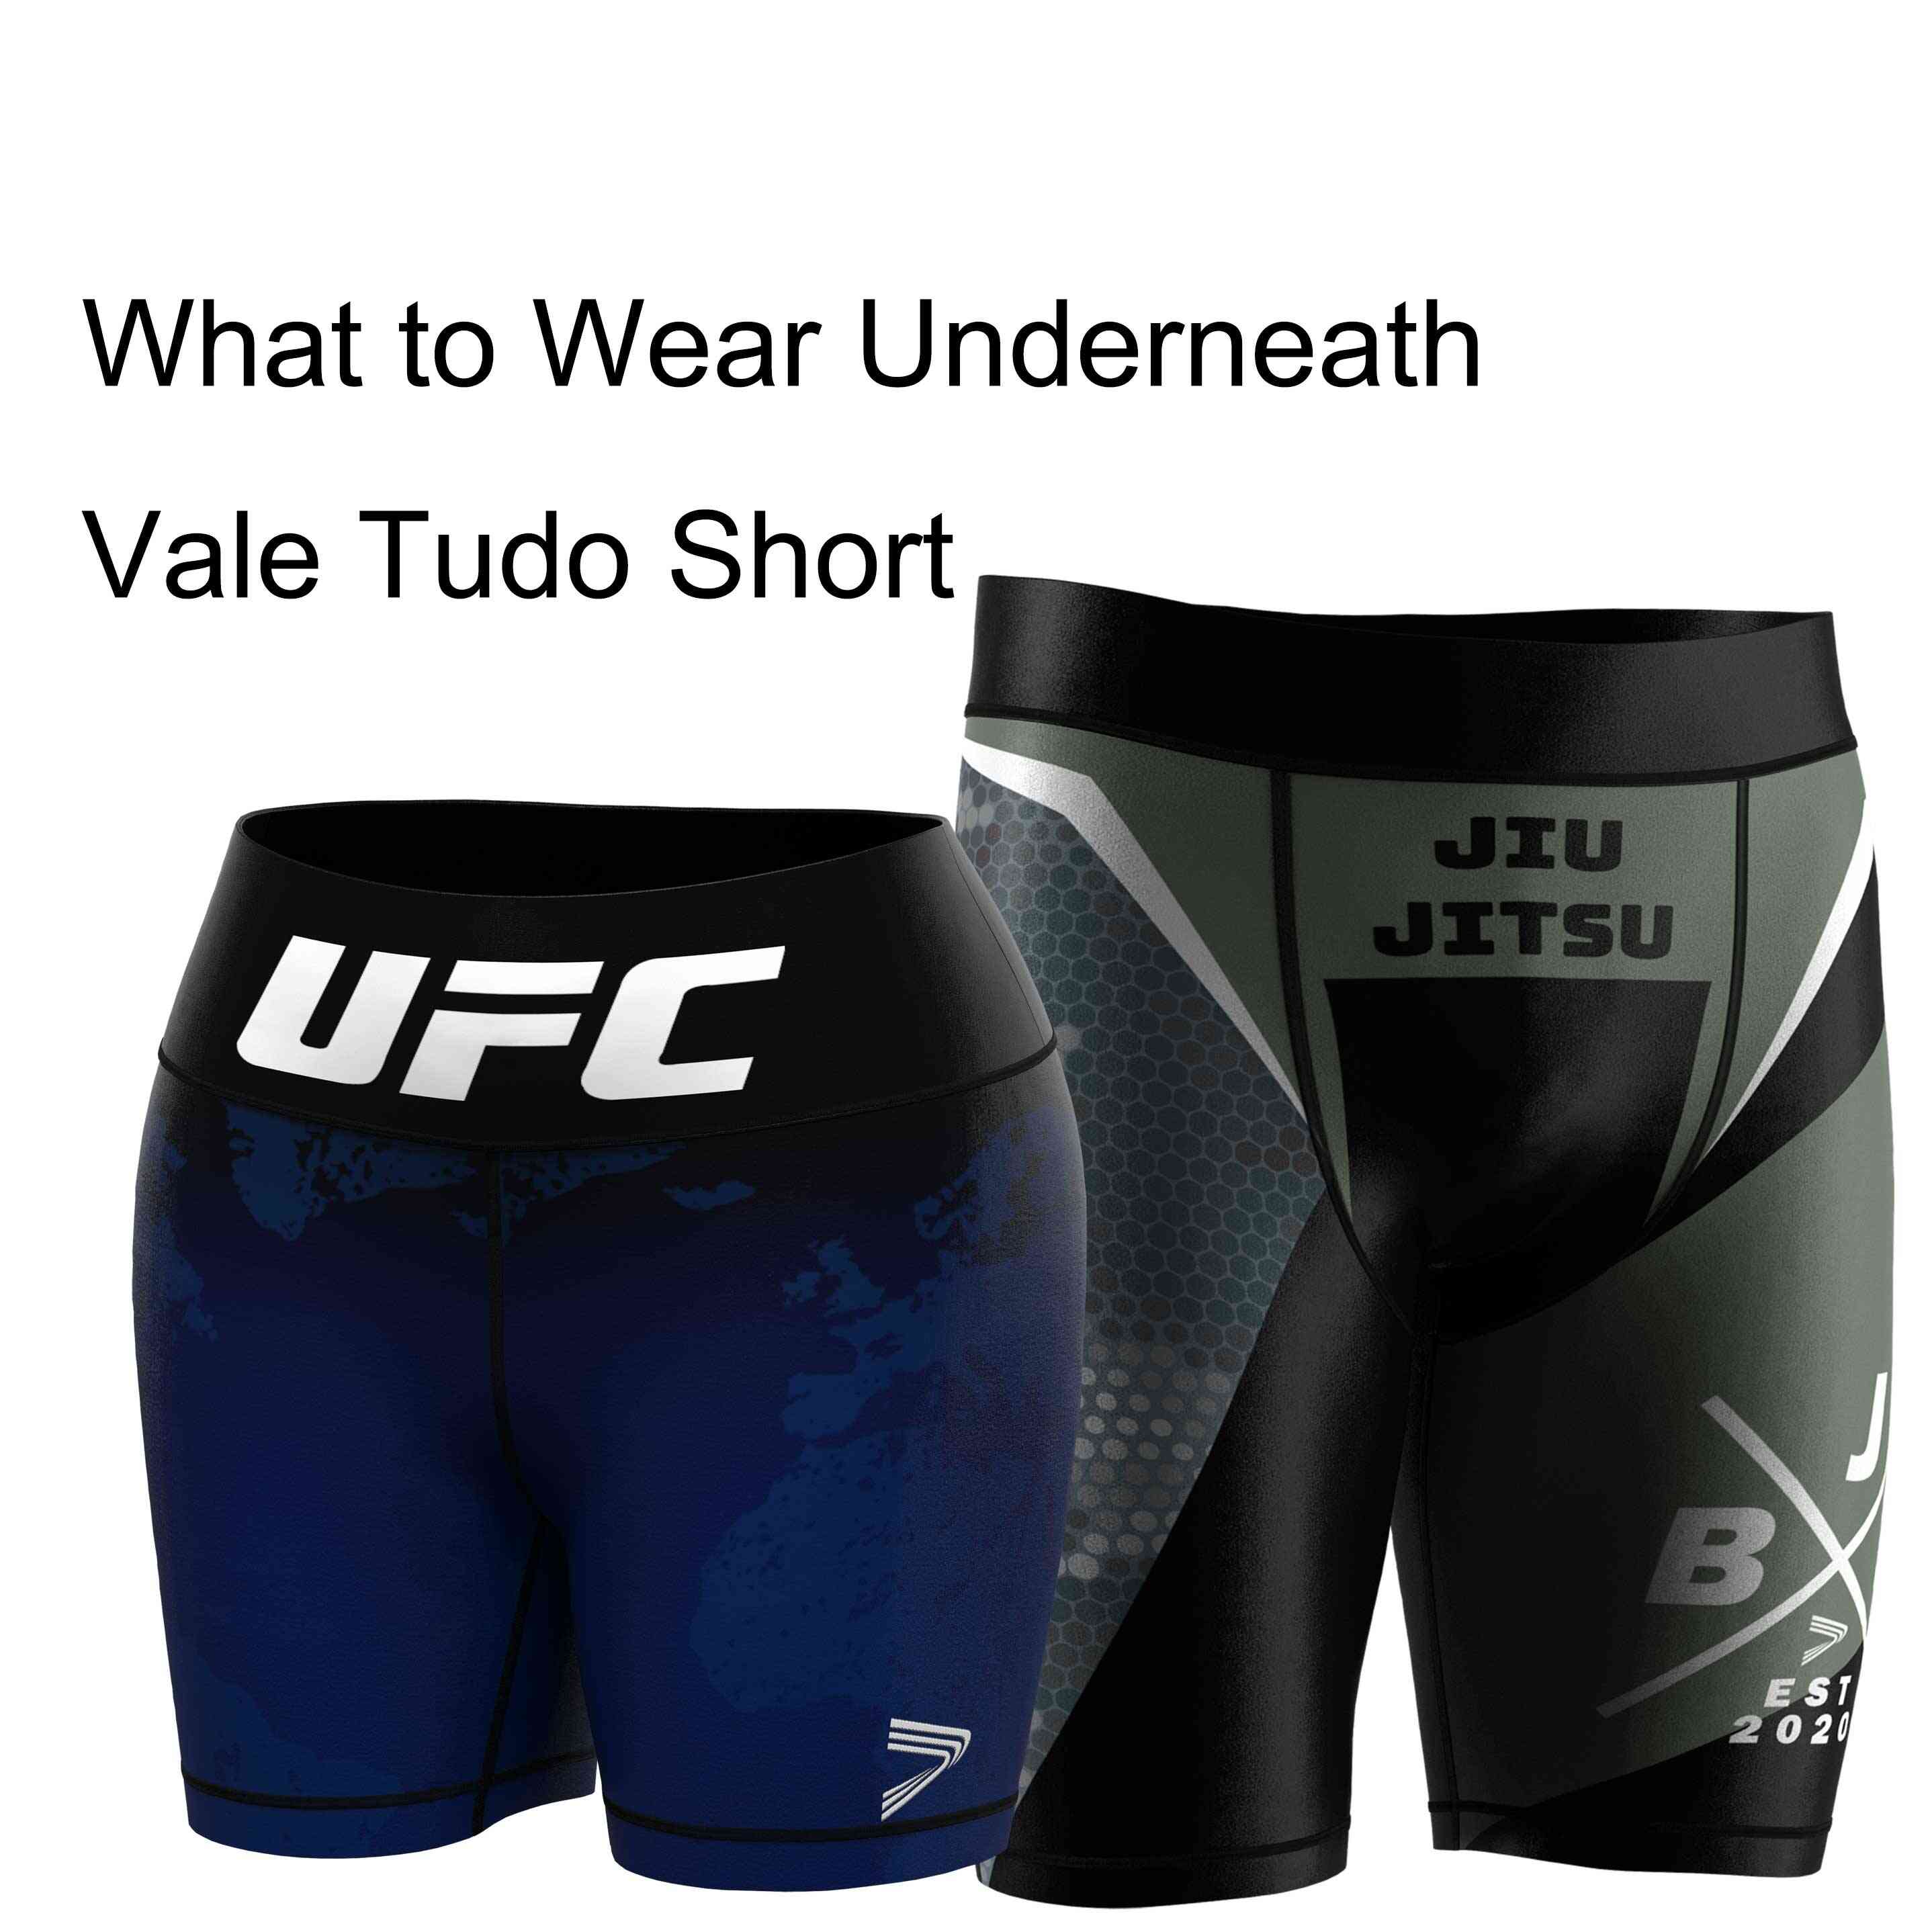 
                The Ultimate Guide to Vale Tudo Short-What to Wear Underneath and How to Choose the Best Pair